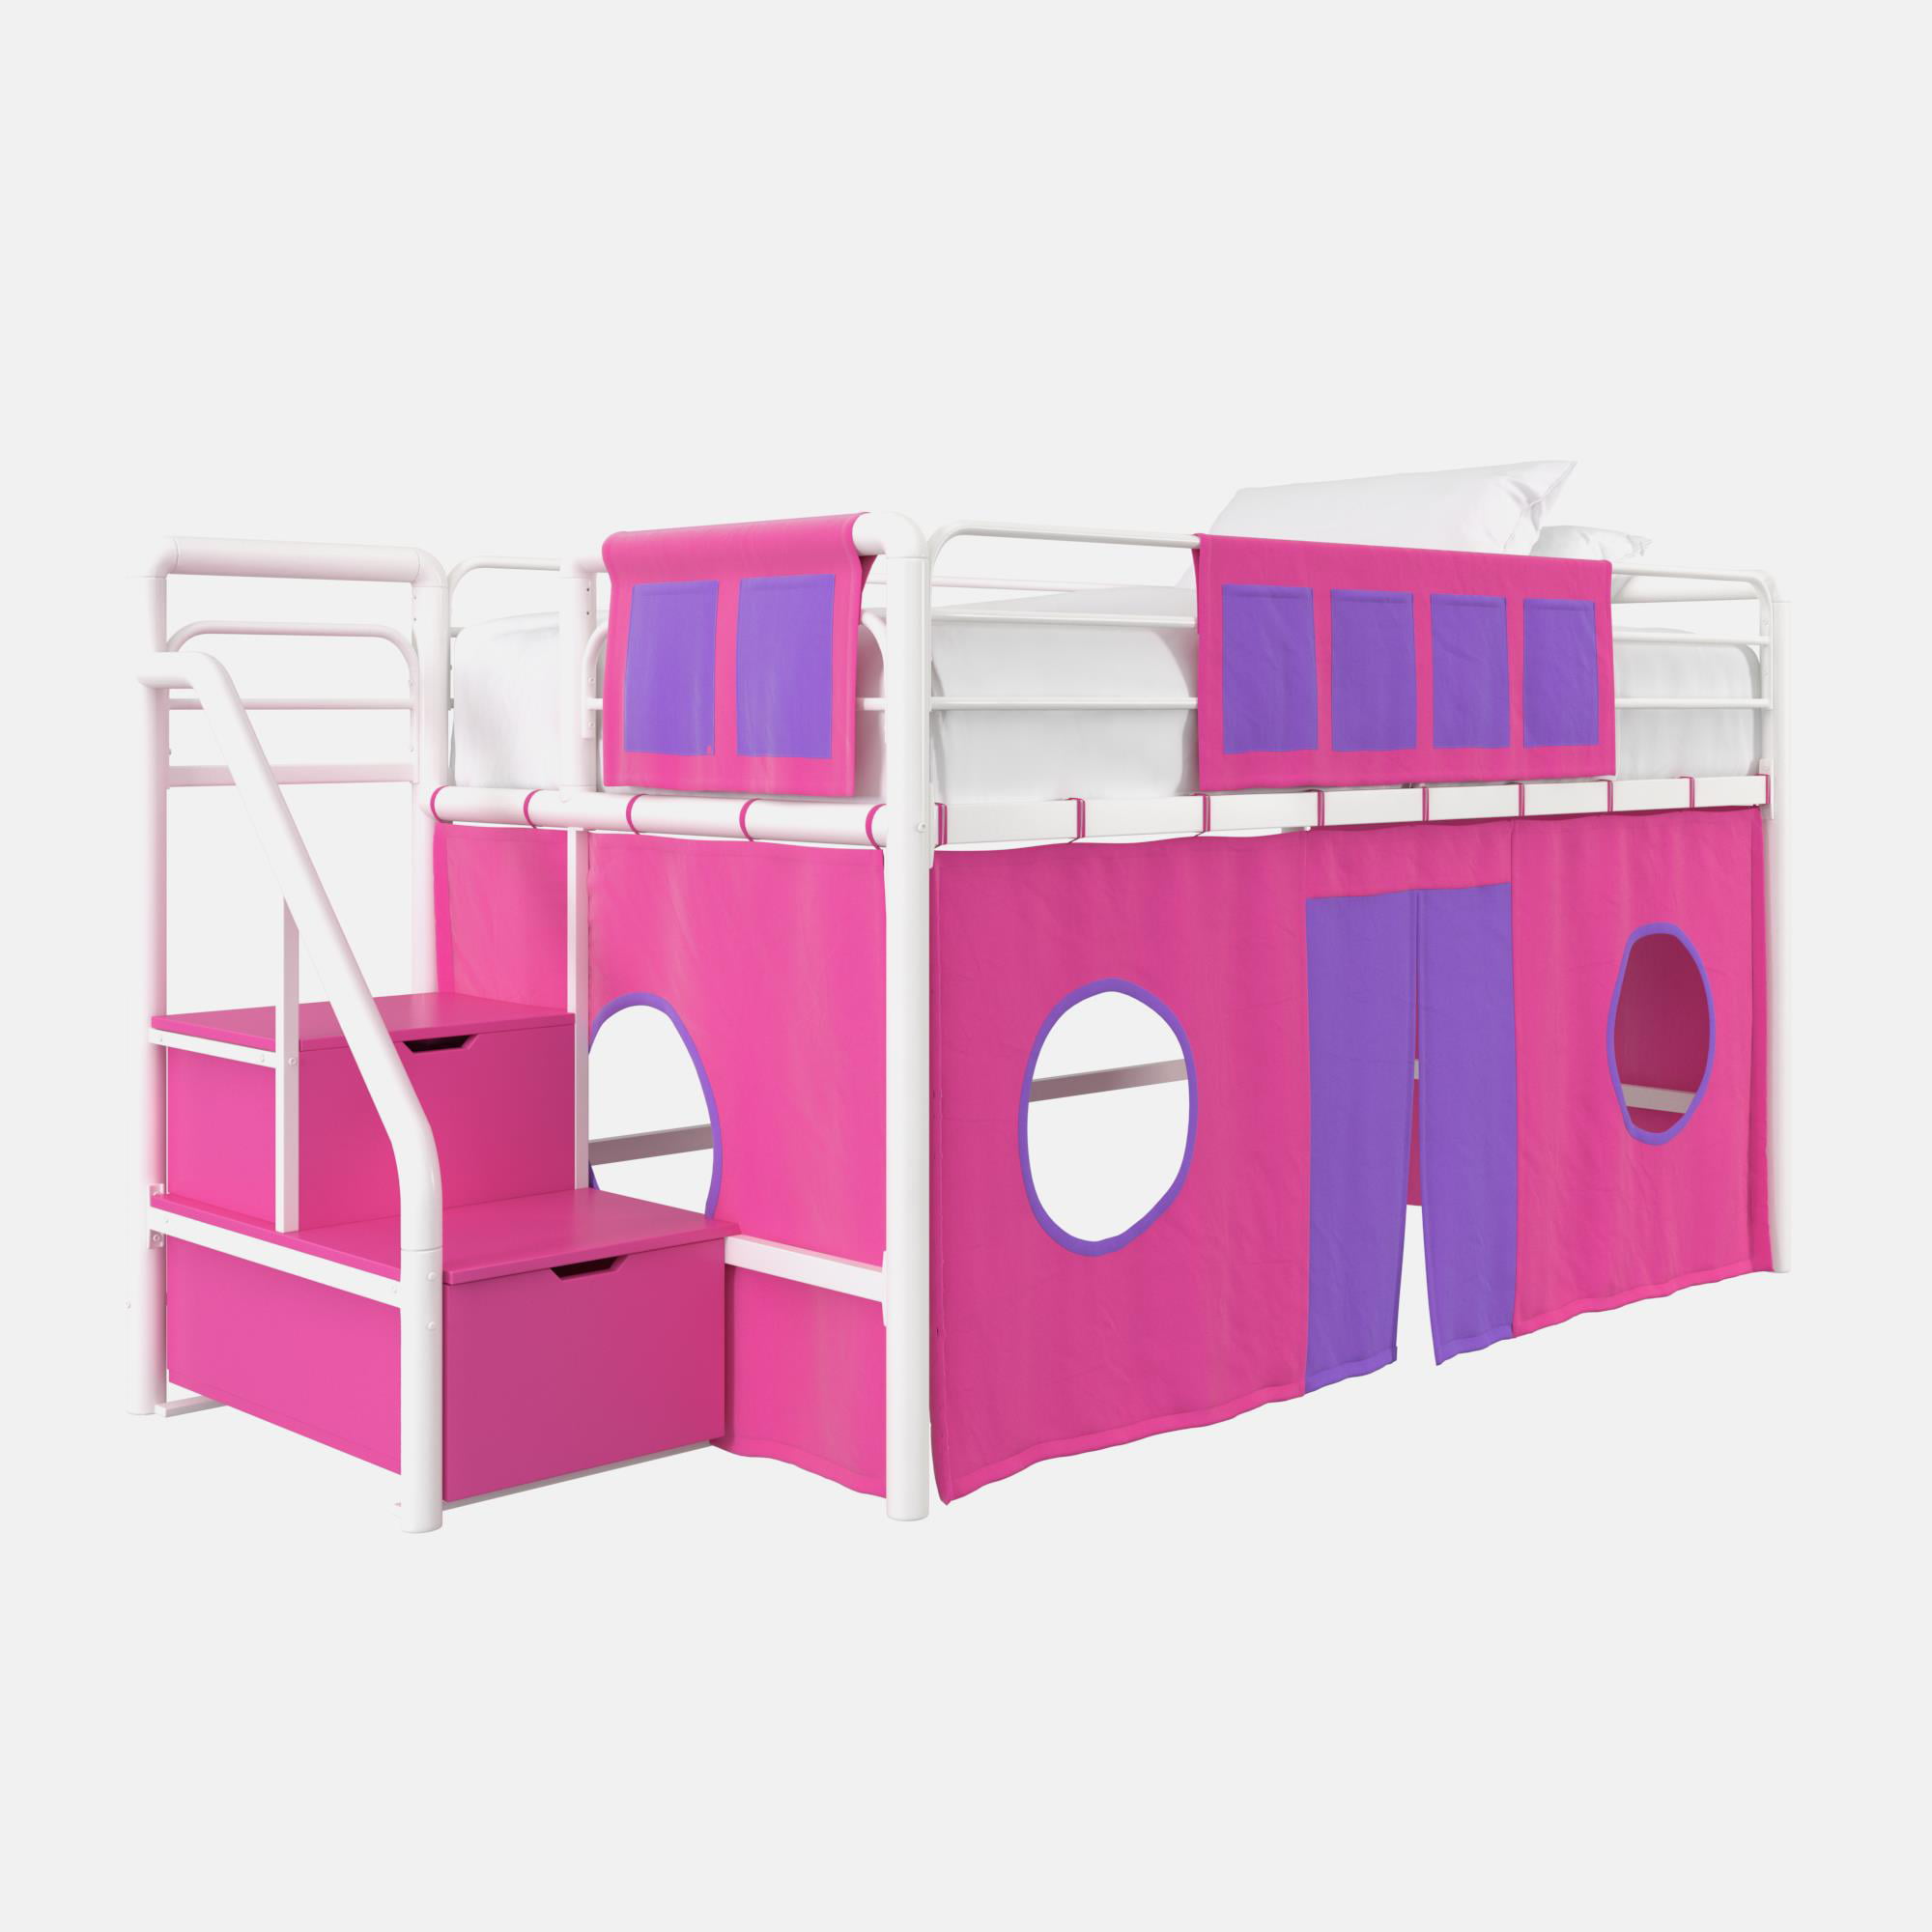 dhp junior twin loft bed with storage steps